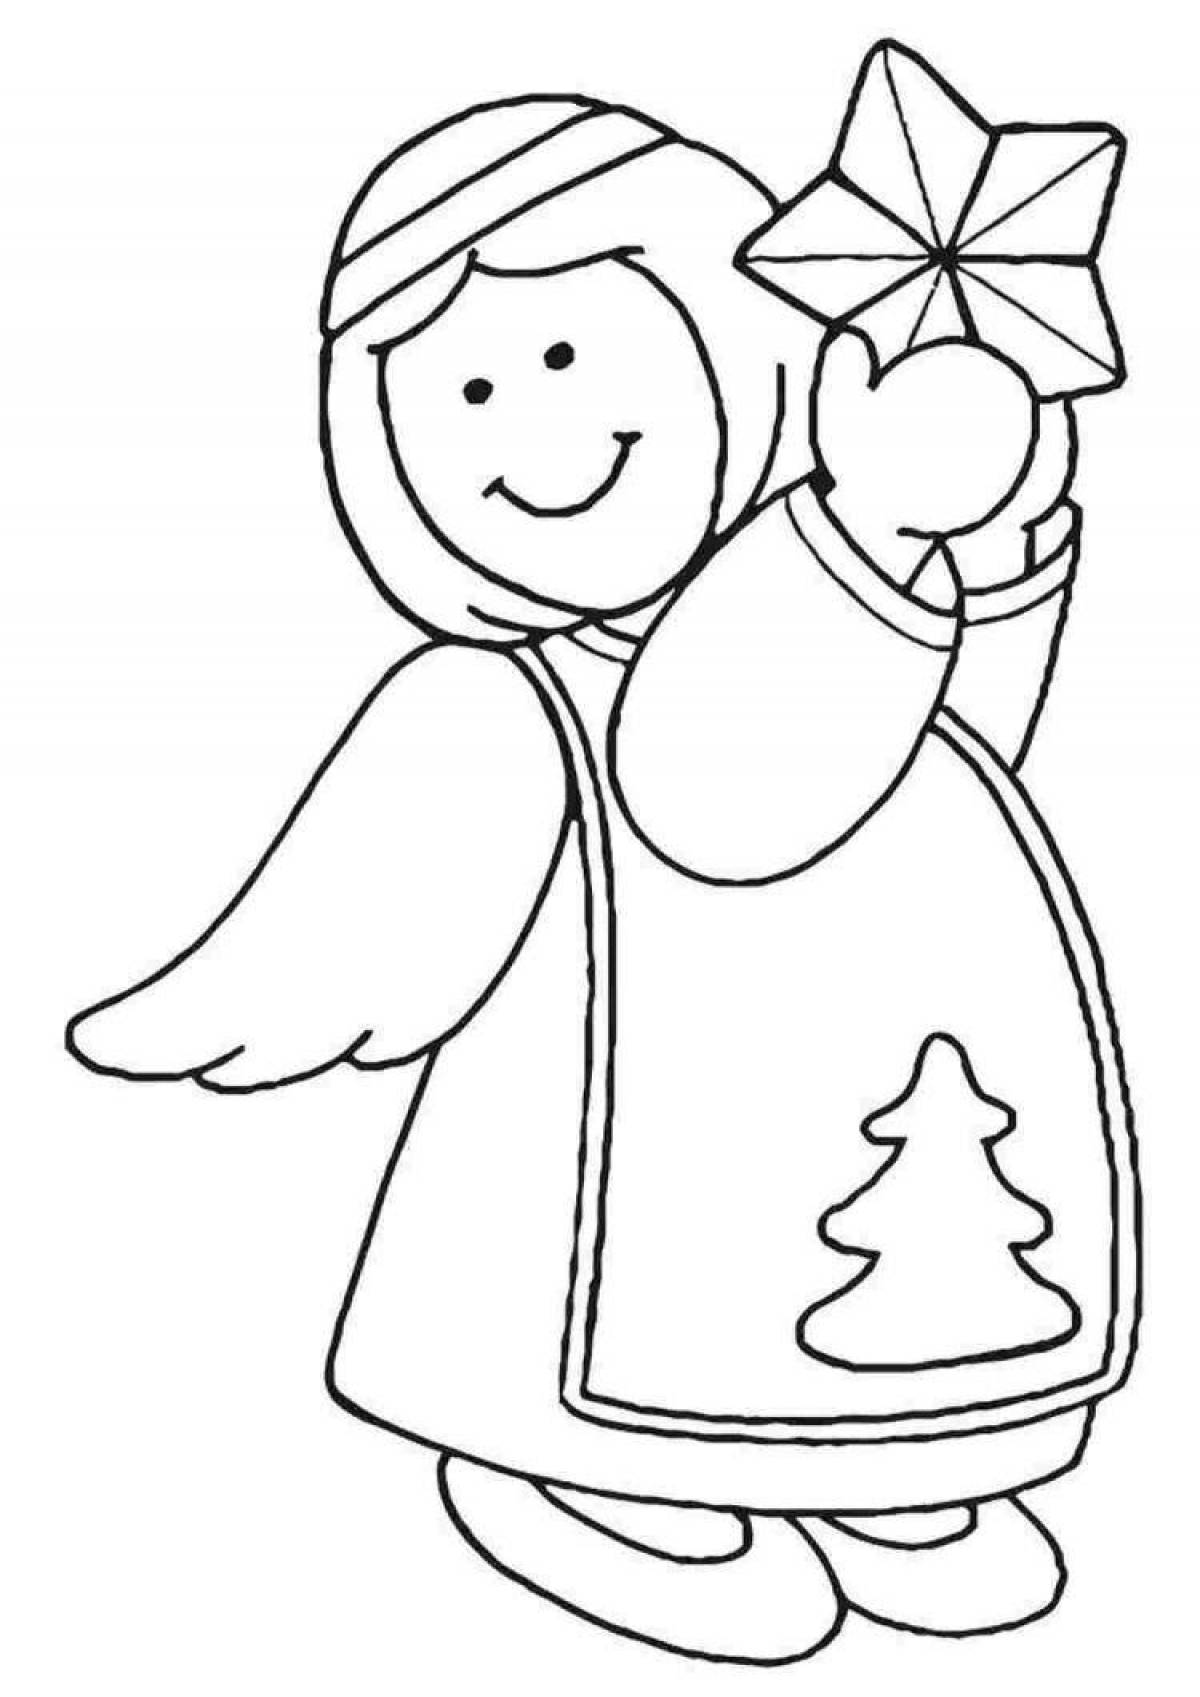 Great Christmas coloring book for kids 3-4 years old